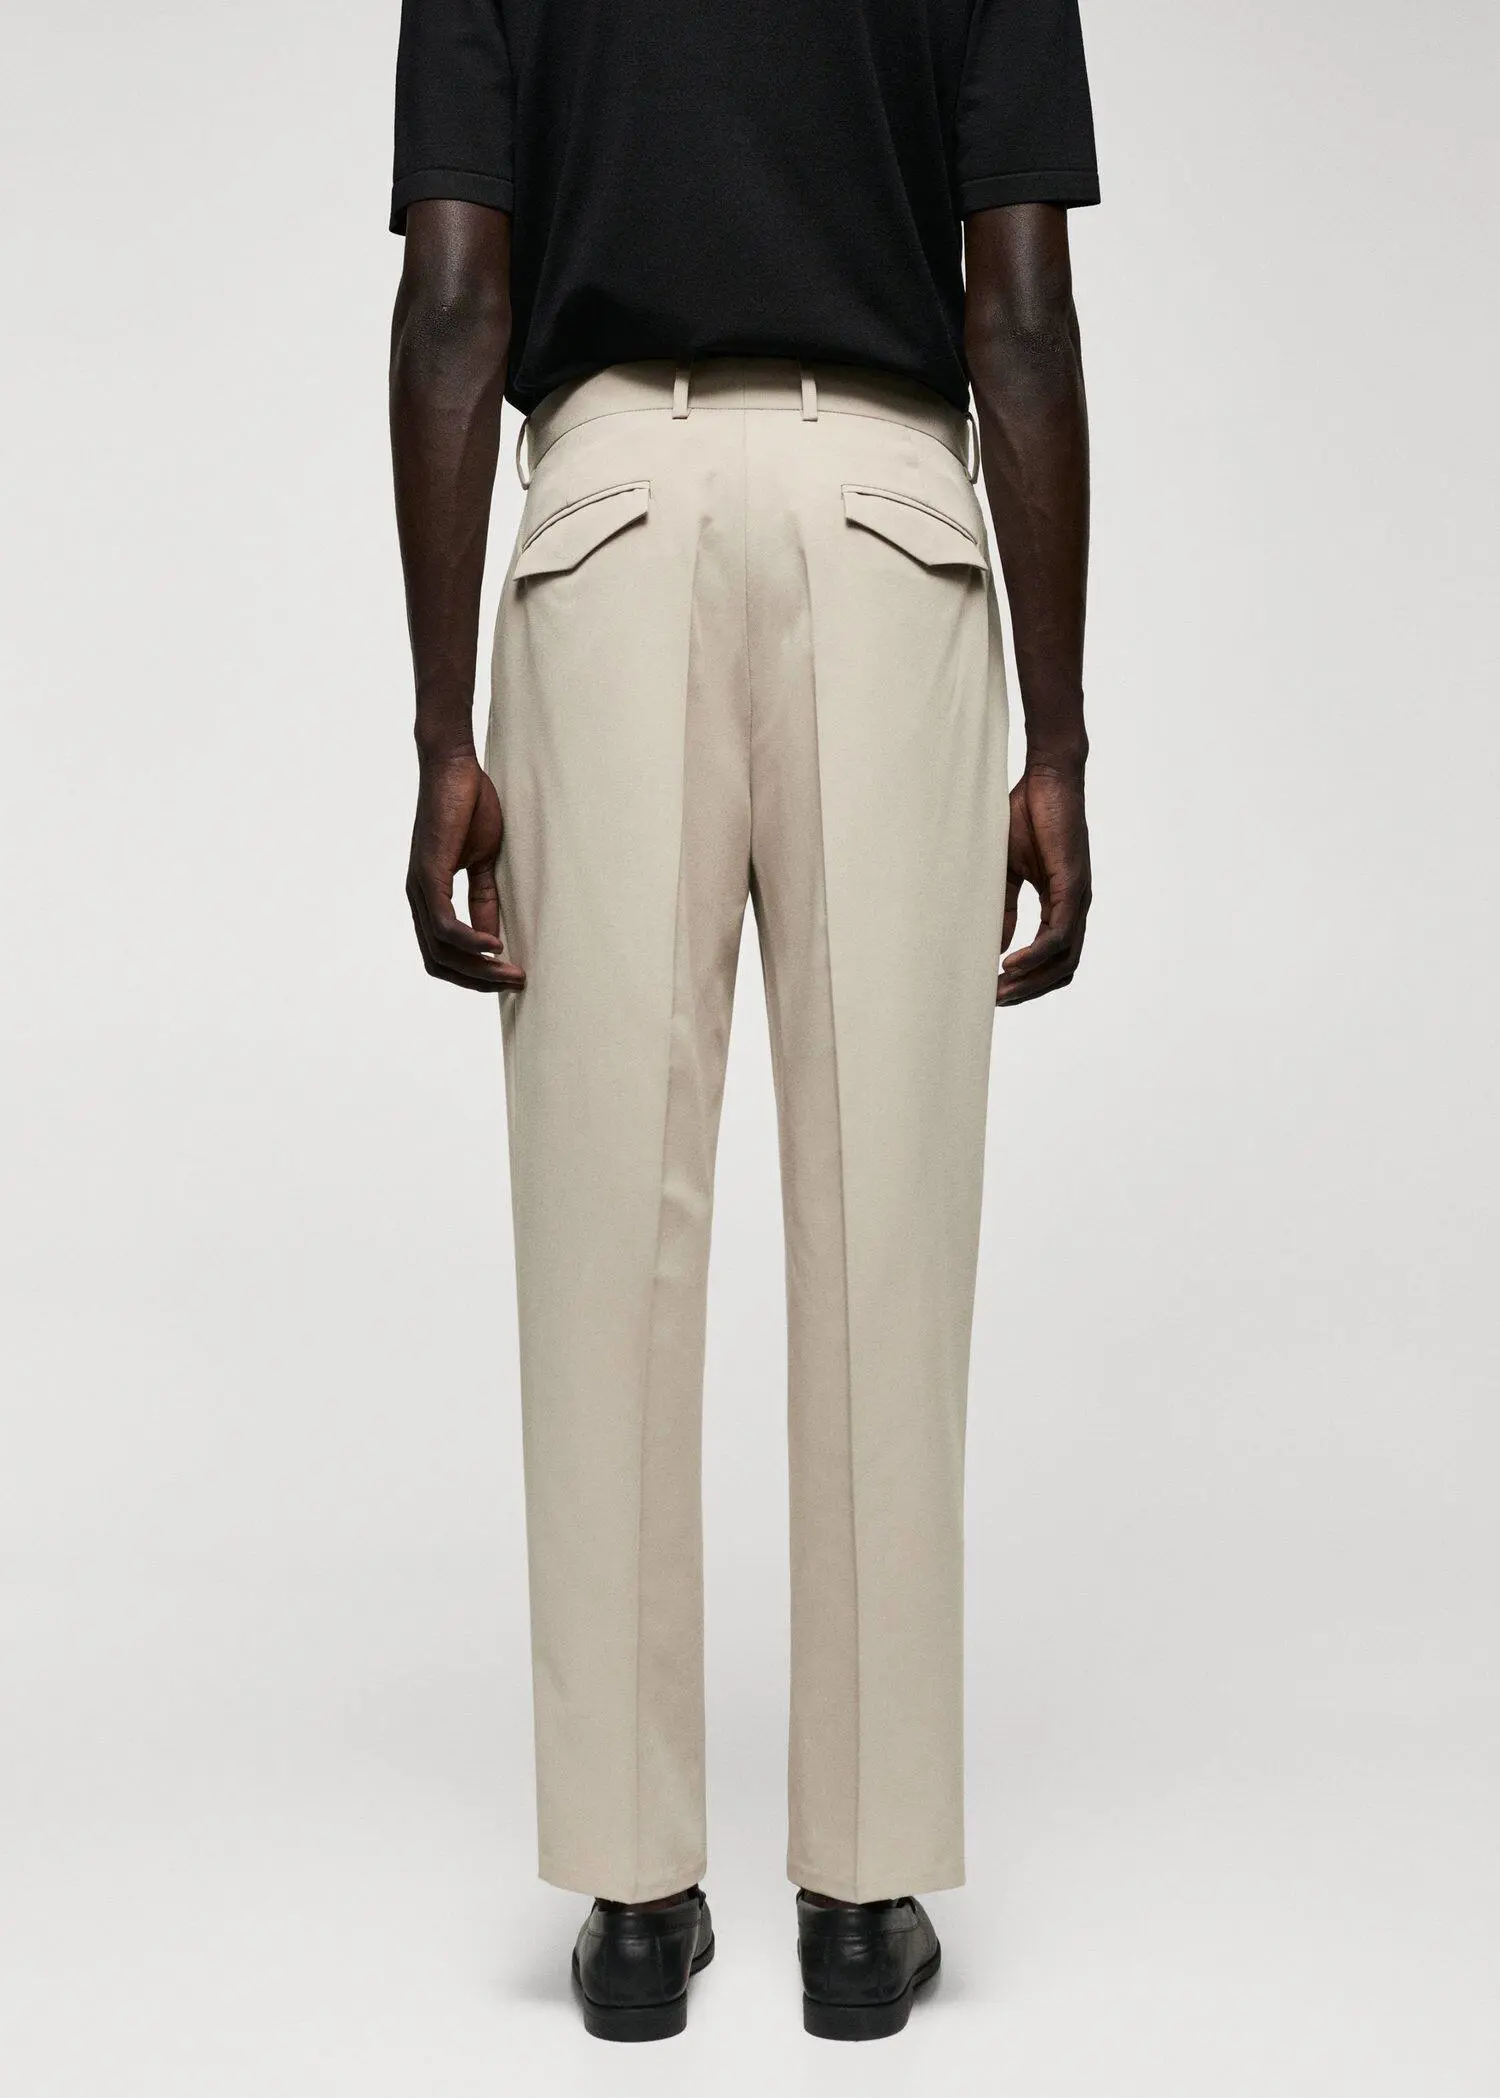 Mango Regular fit suit trousers with pleats. a man wearing a black shirt and beige pants. 